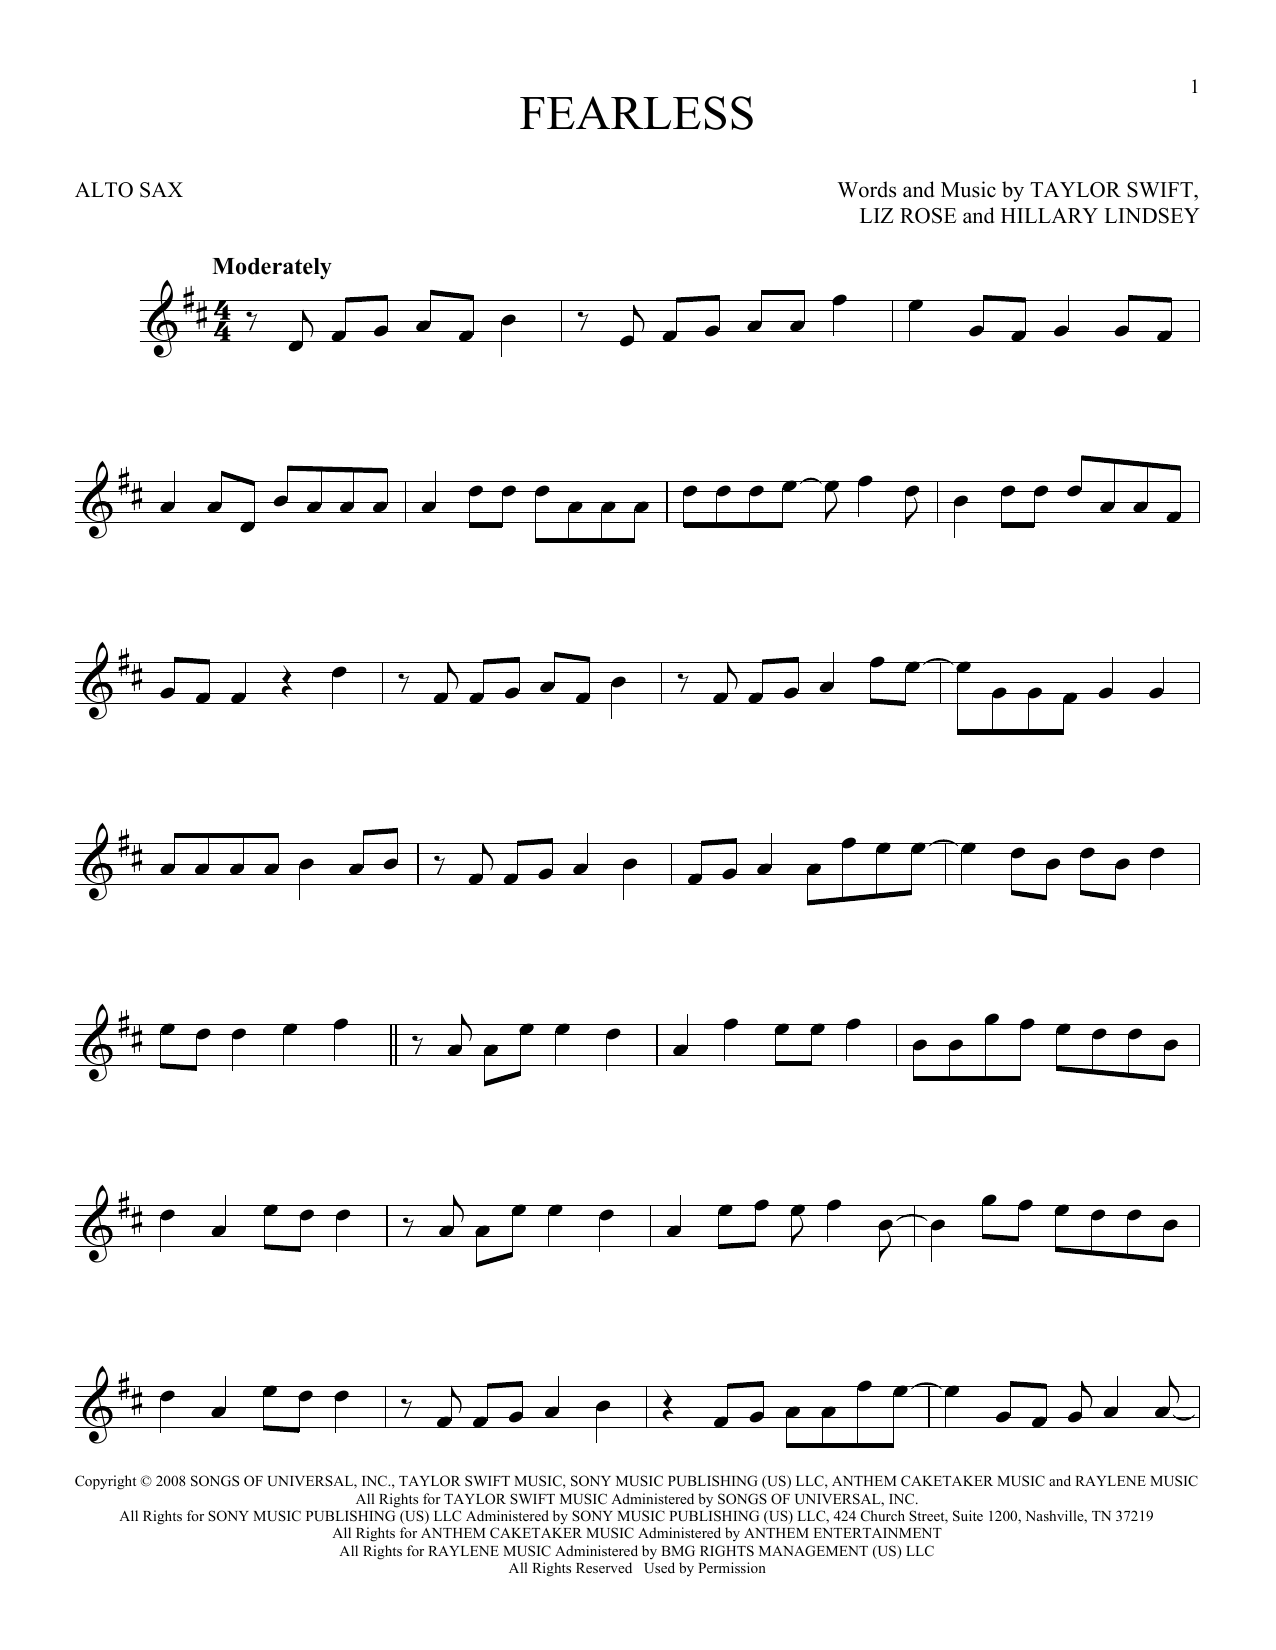 Download Taylor Swift Fearless Sheet Music